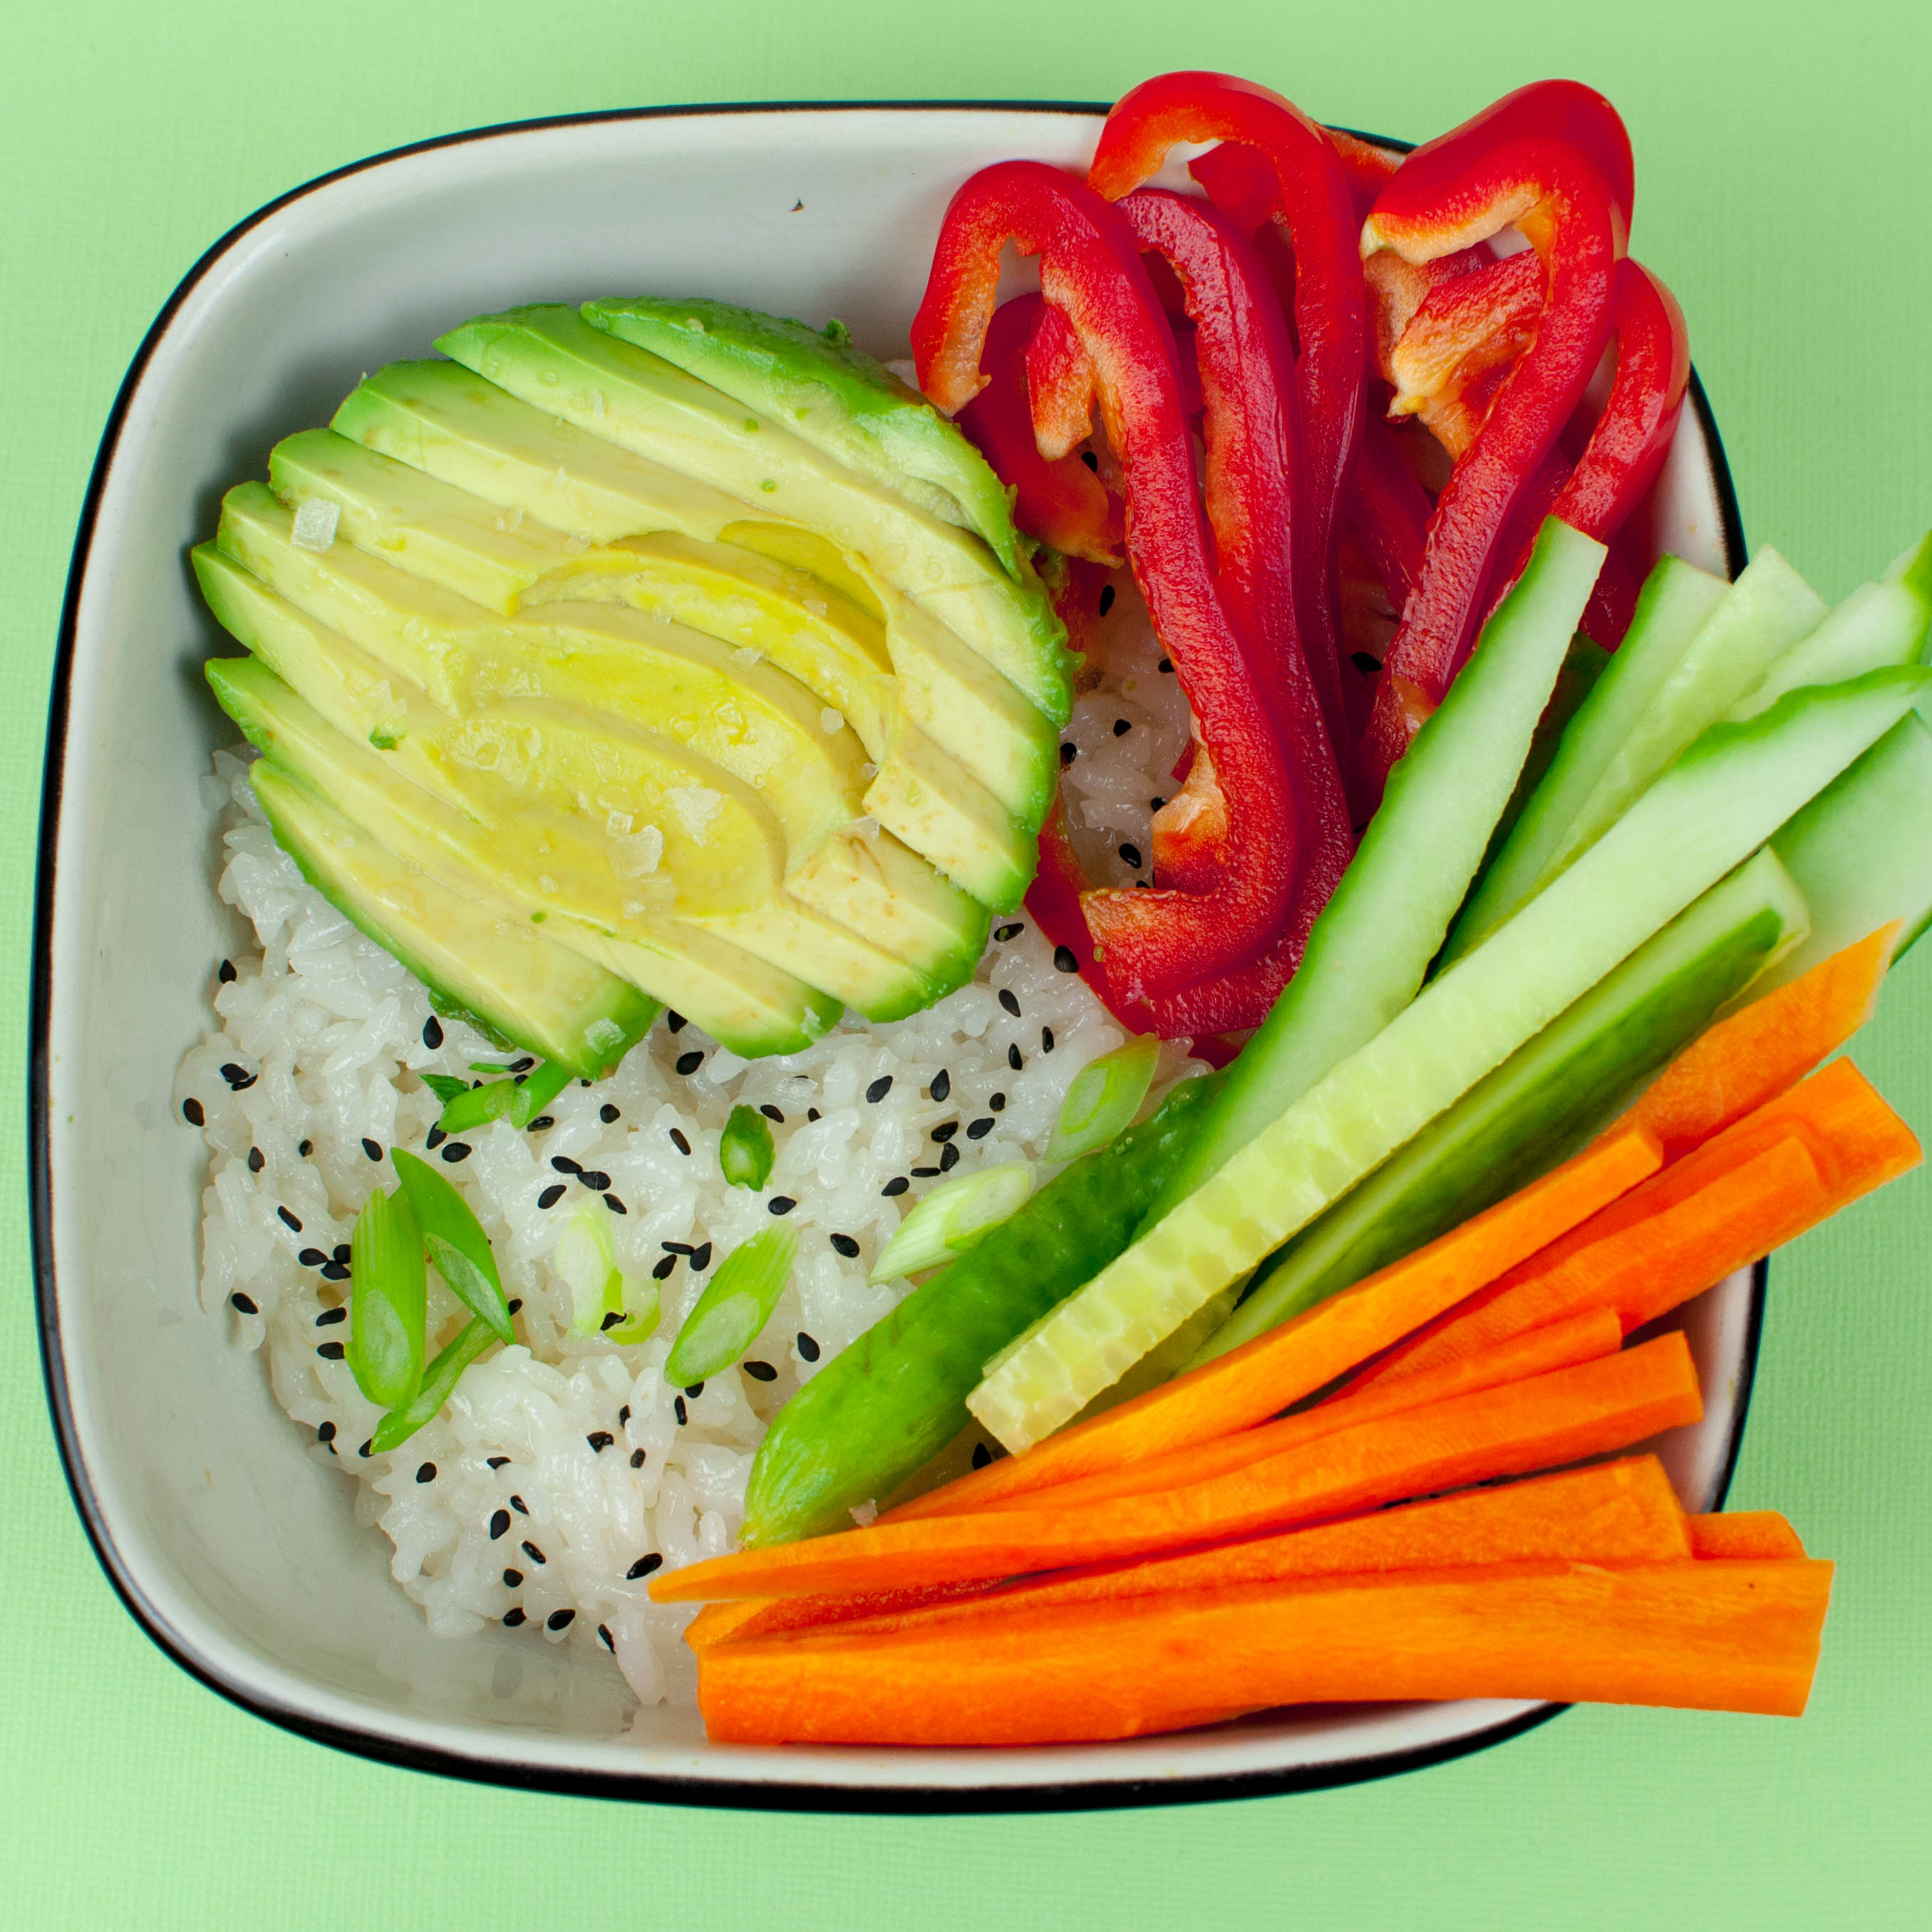 Sushi Bowl with Avocado, Red Bell Pepper, Cucumber, Carrot, Scallion, and Black Sesame Seeds